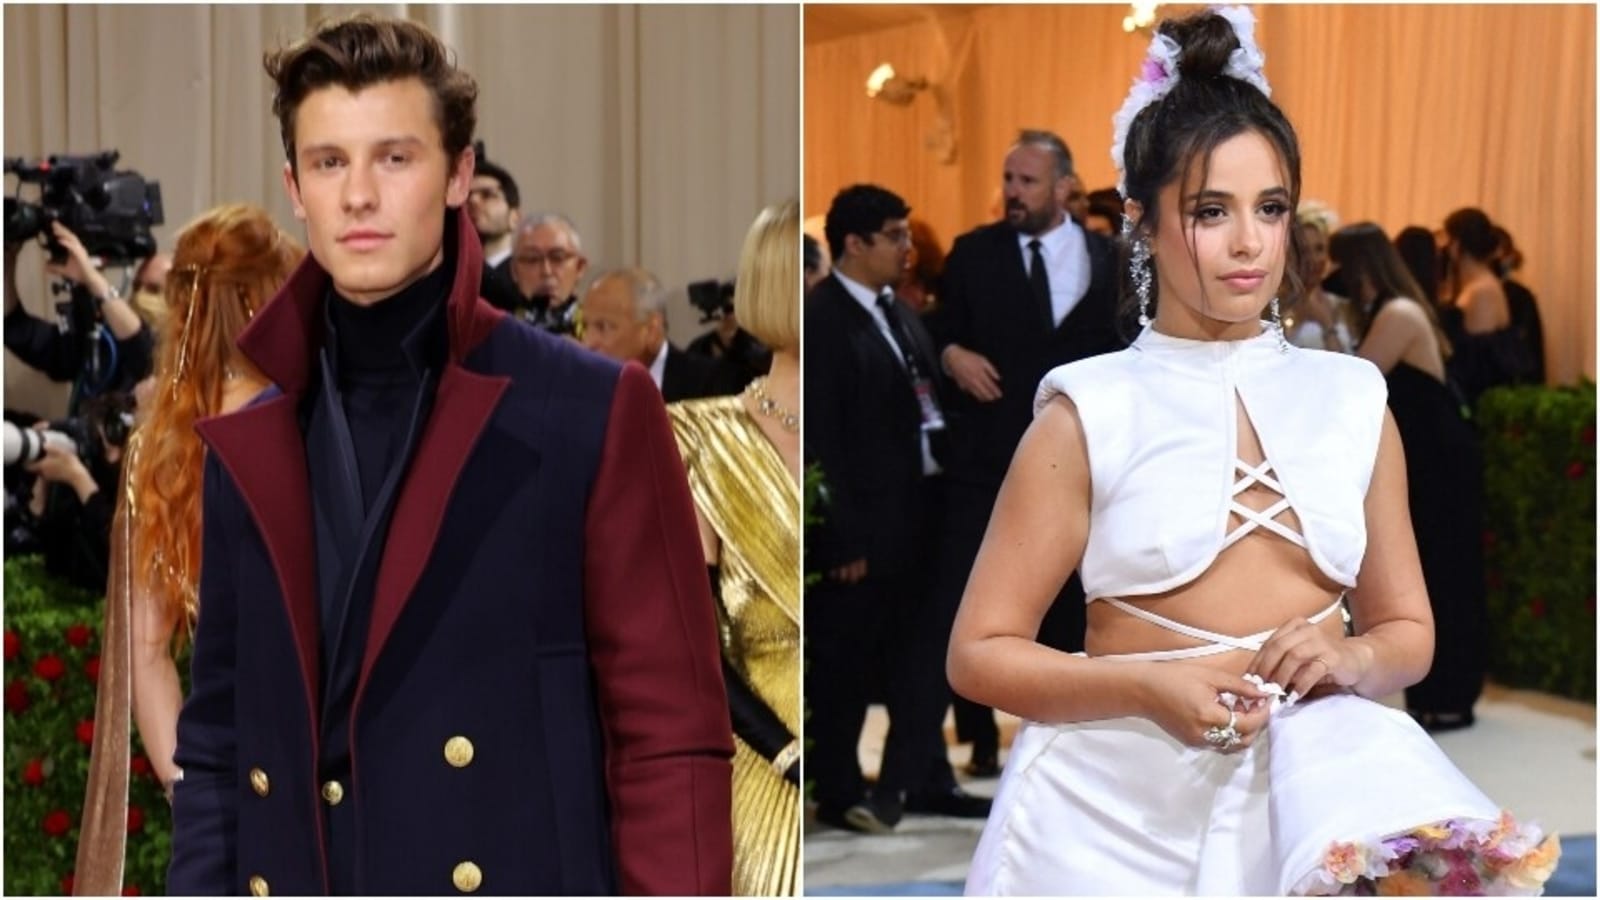 Met Gala 2022: Exes Camila Cabello and Shawn Mendes make solo appearances post break up